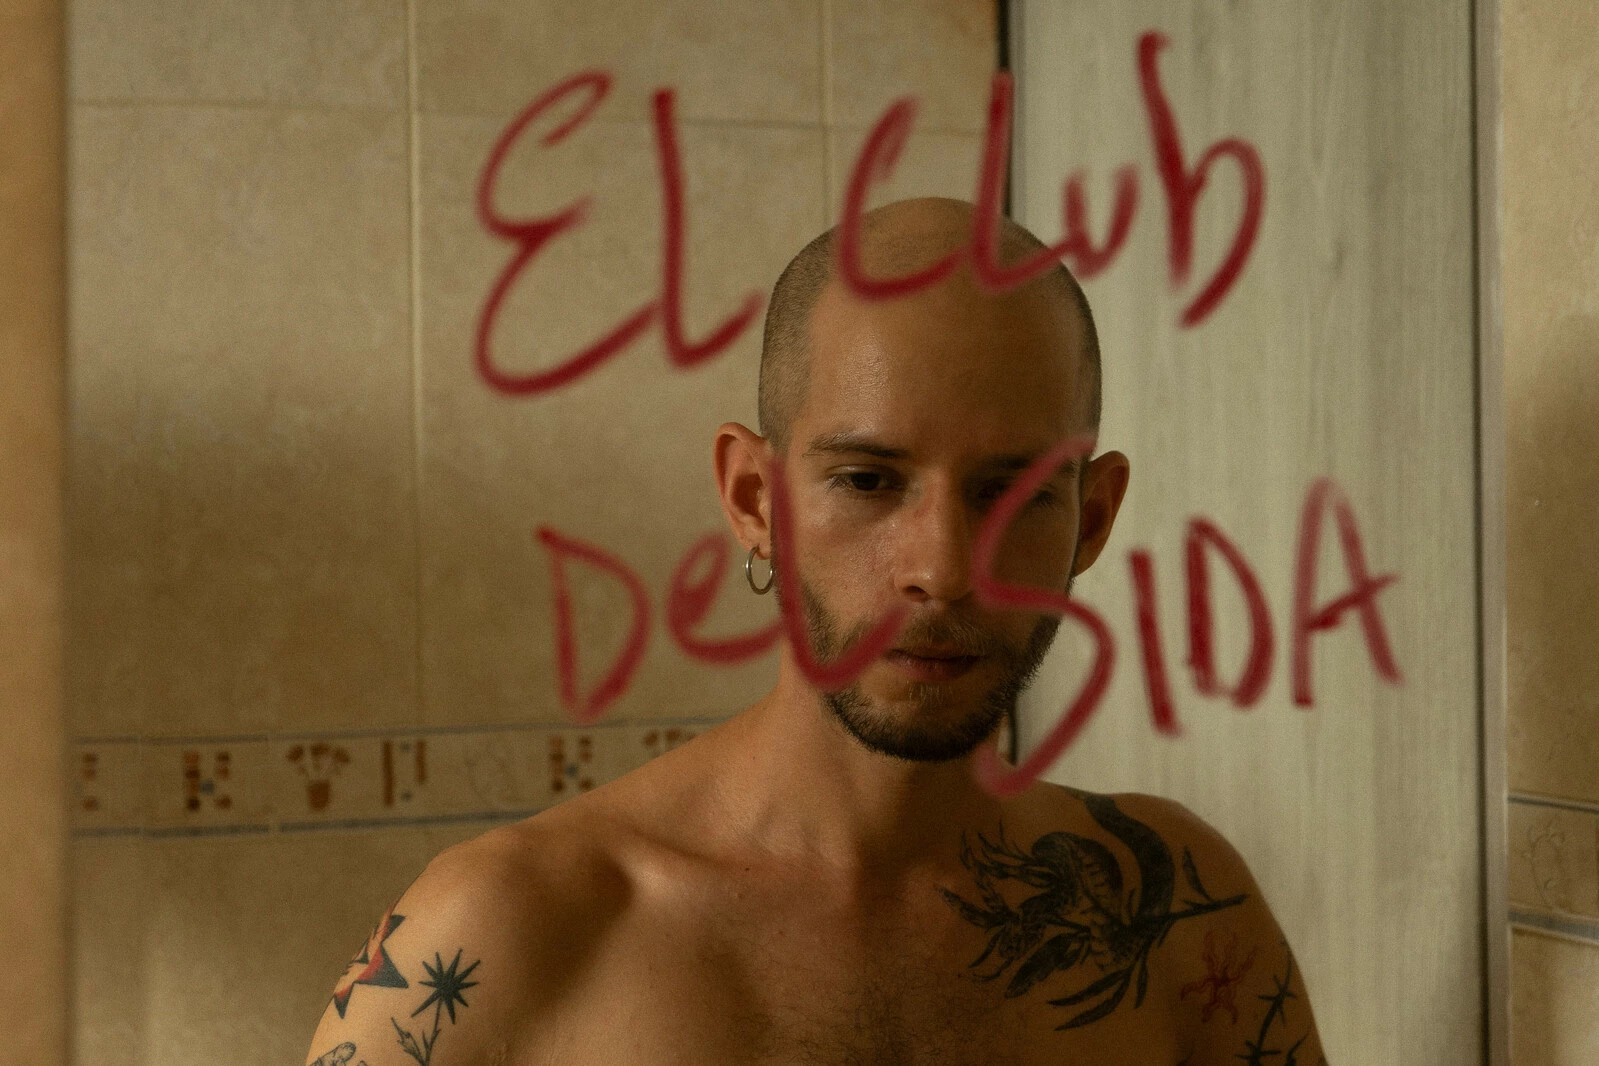 A balding, shirtless person reflected in a mirror that has on it El Club Del SIDA written in red